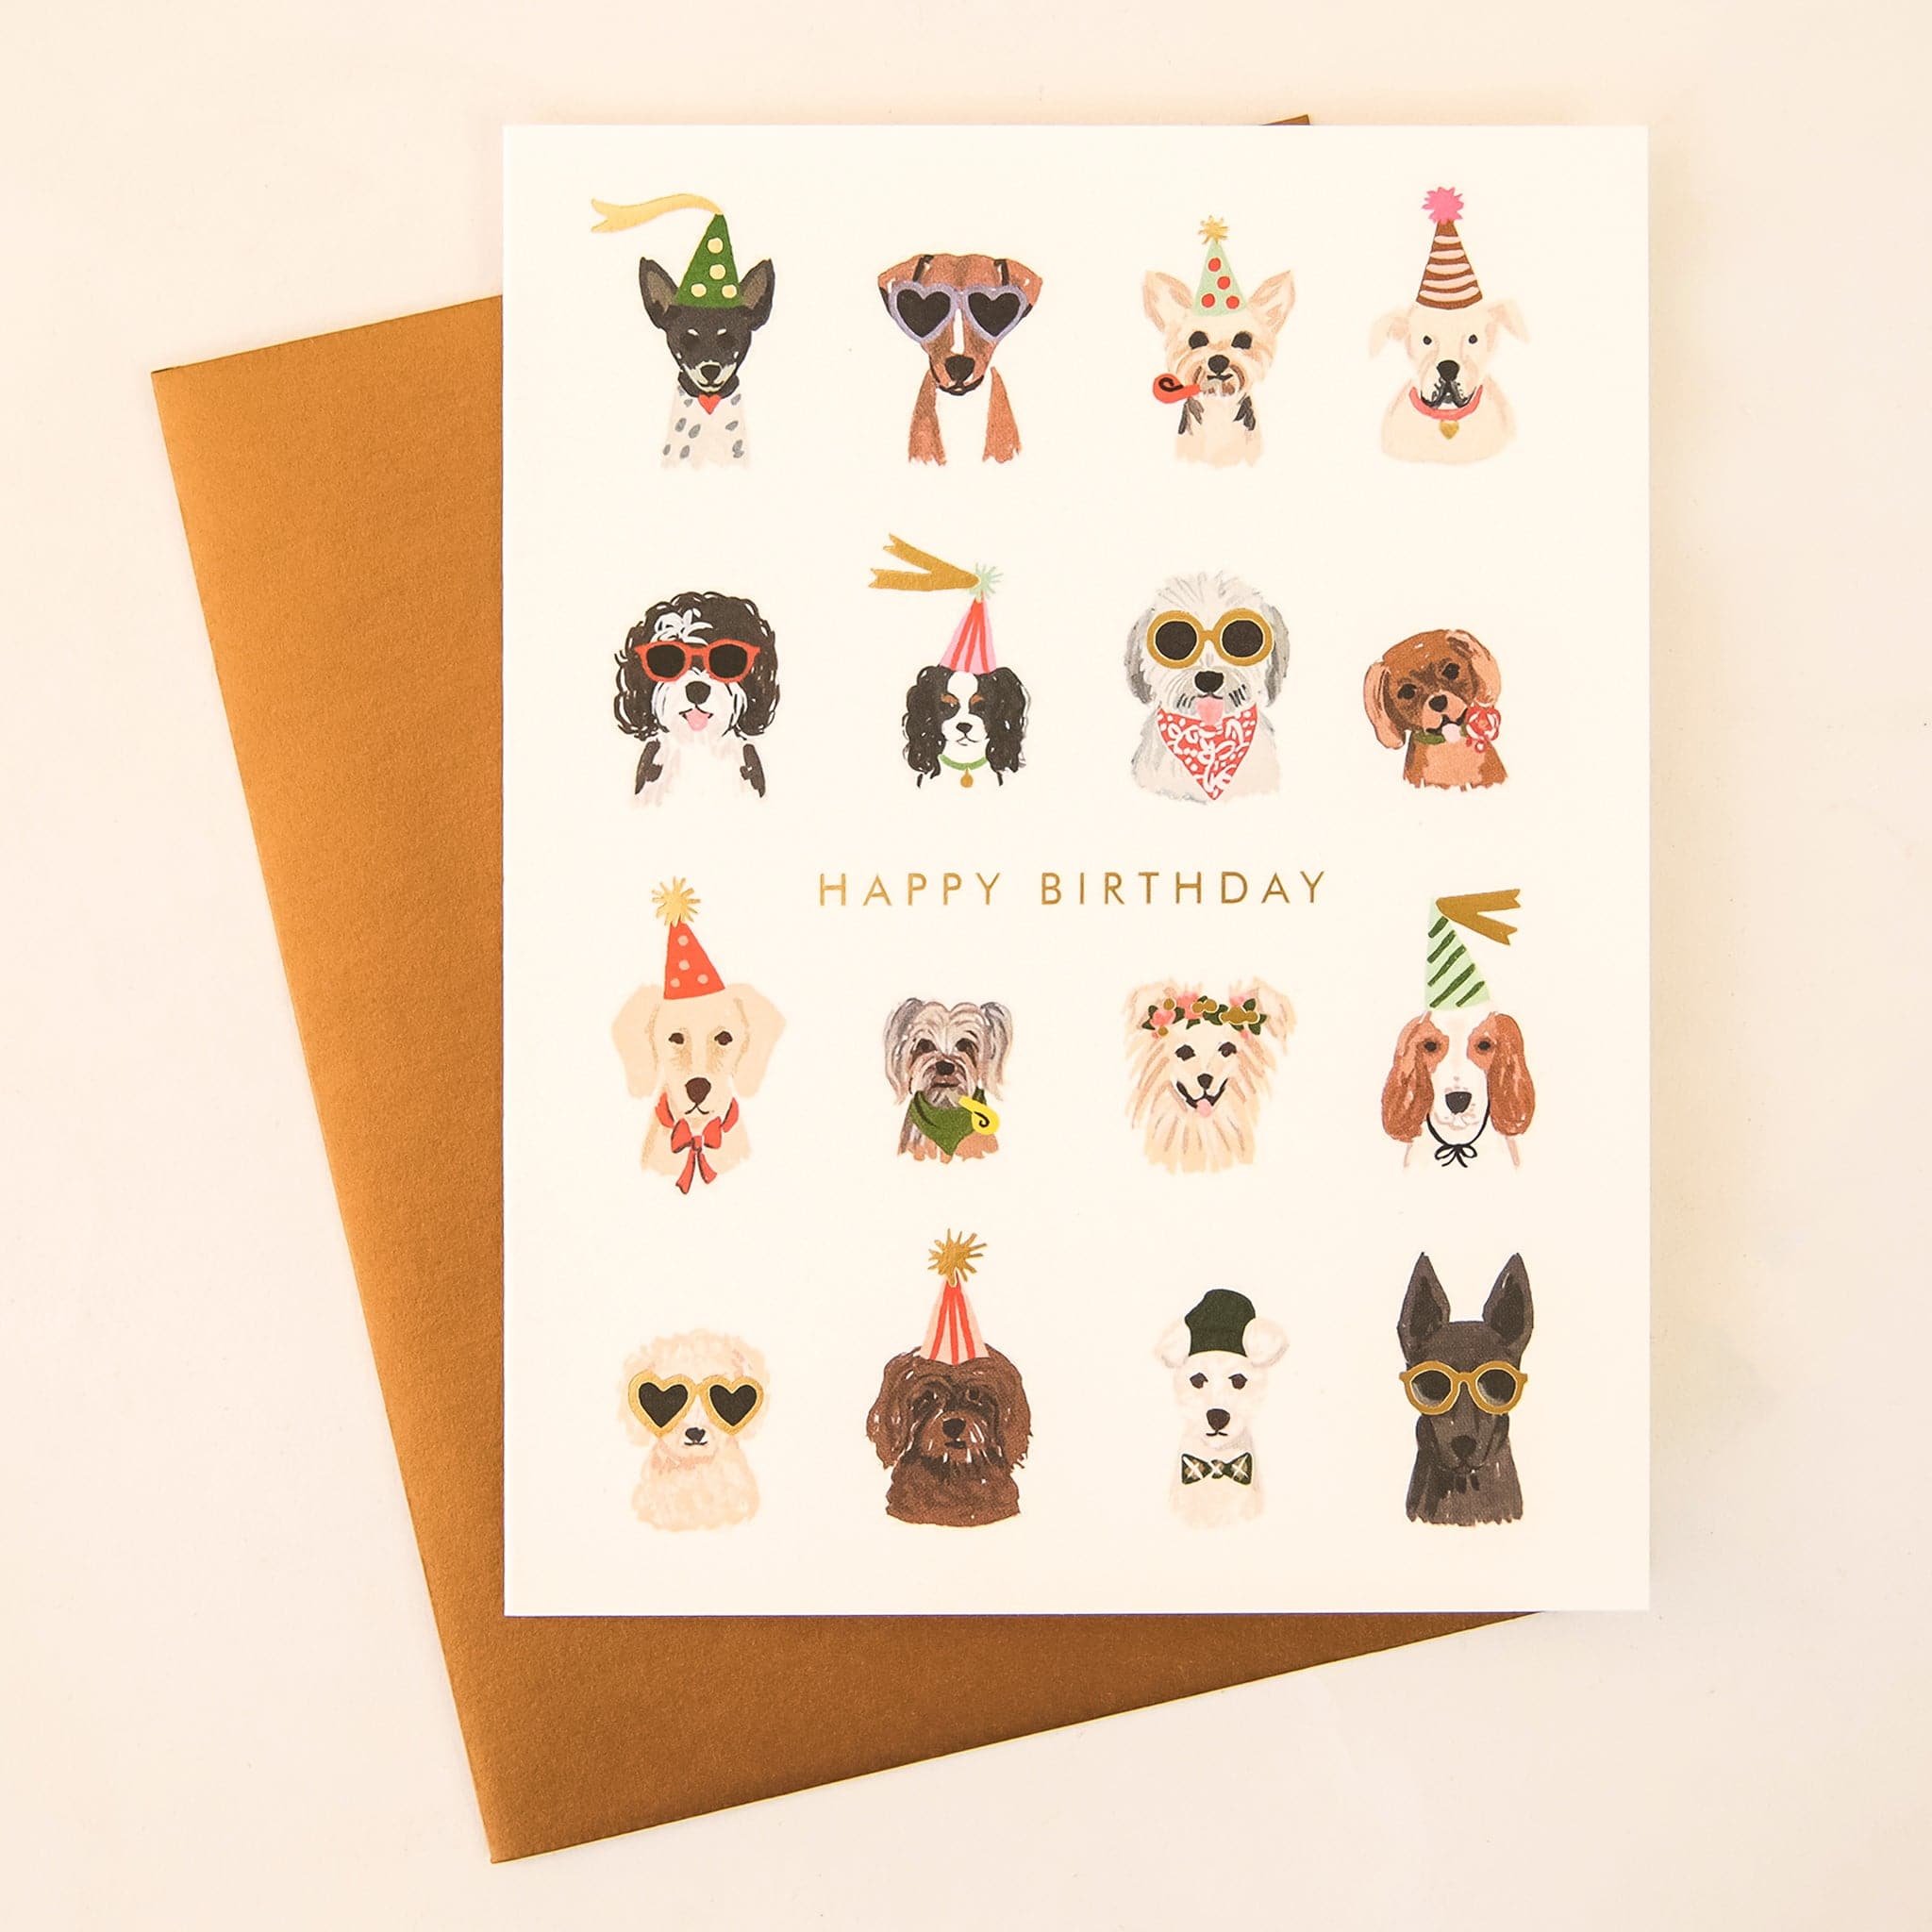 On a cream background is a gold envelope and a white card with various breeds of dogs in party attire and sunglasses as well as text in the center that reads, "Happy Birthday" in gold letters. 